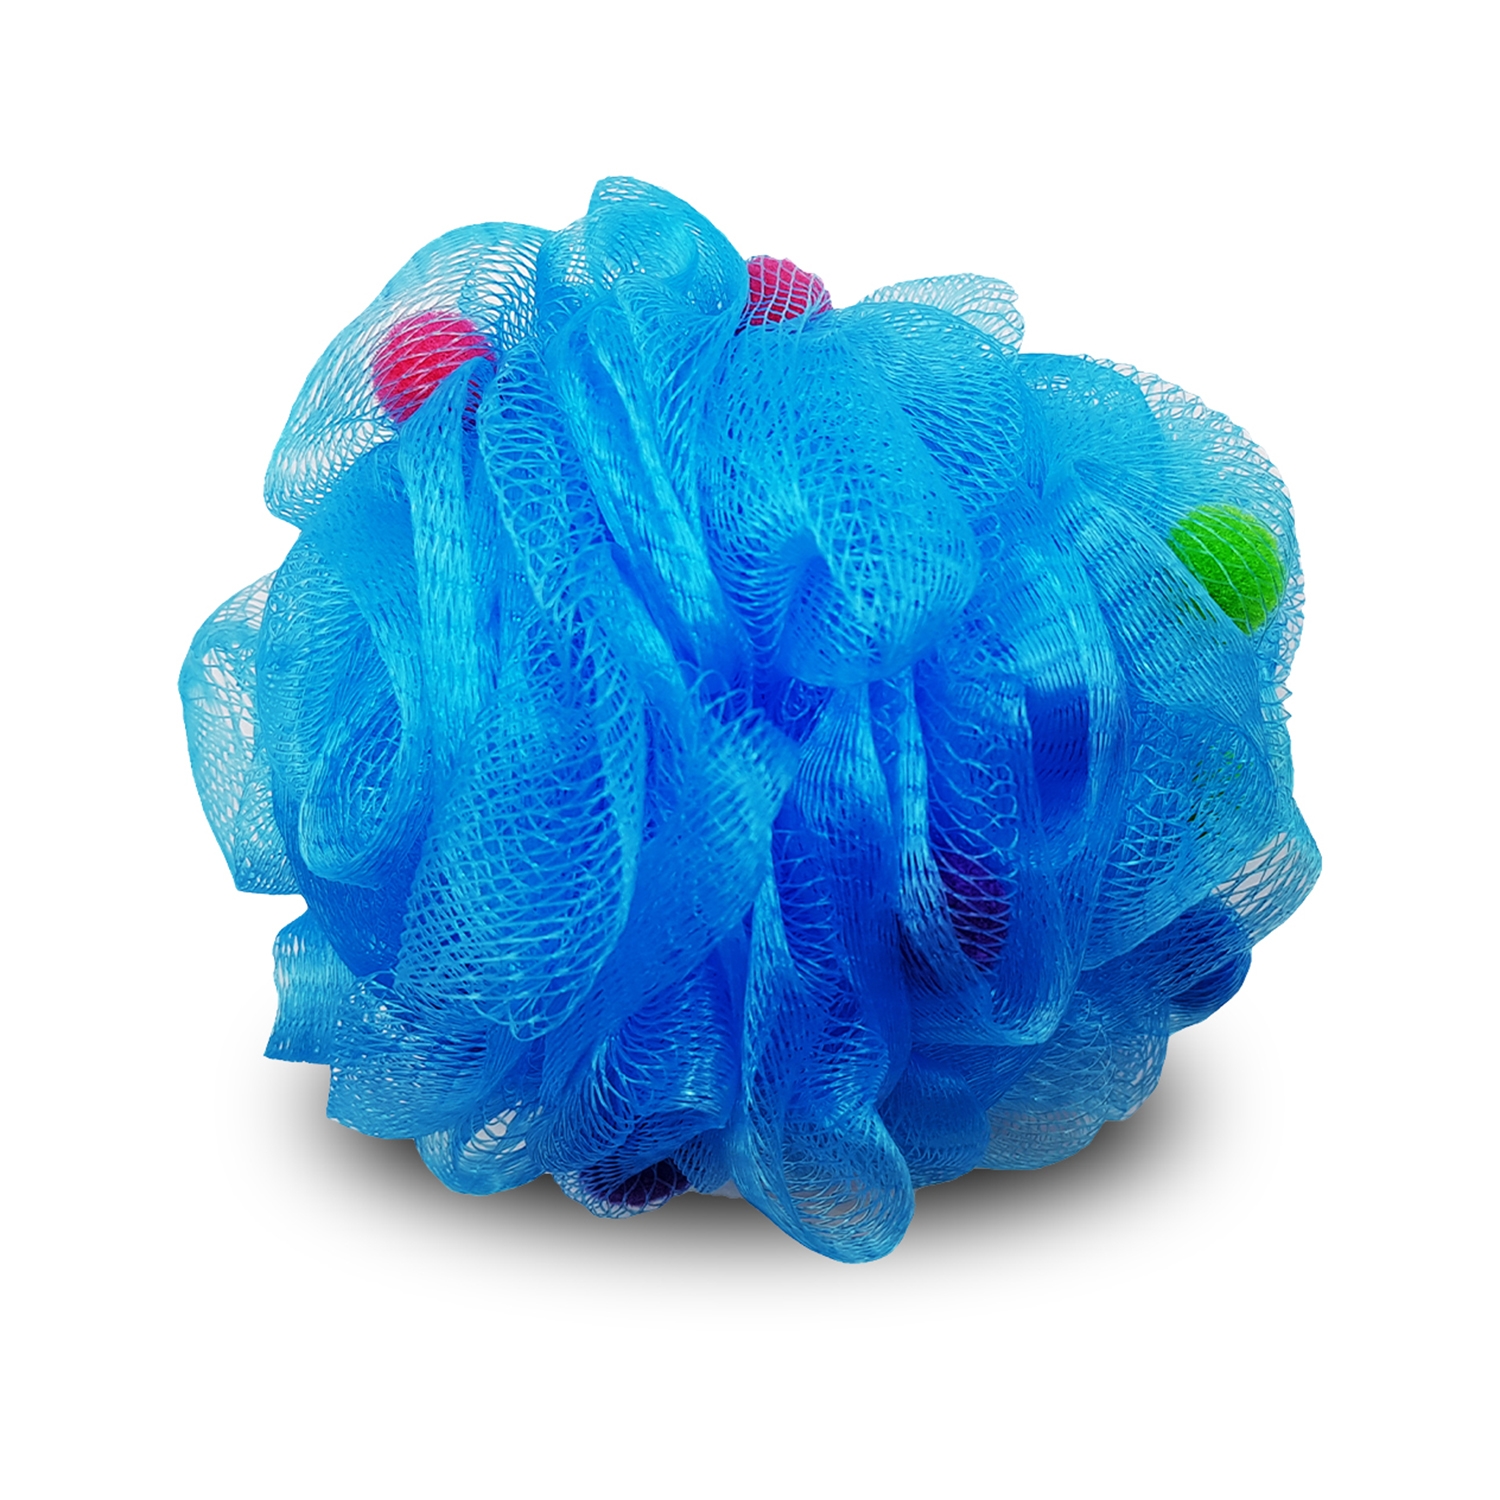 Majestique | Majestique Cleanse Flower Loofah Mesh Bath Shower Ball (Color May Vary)